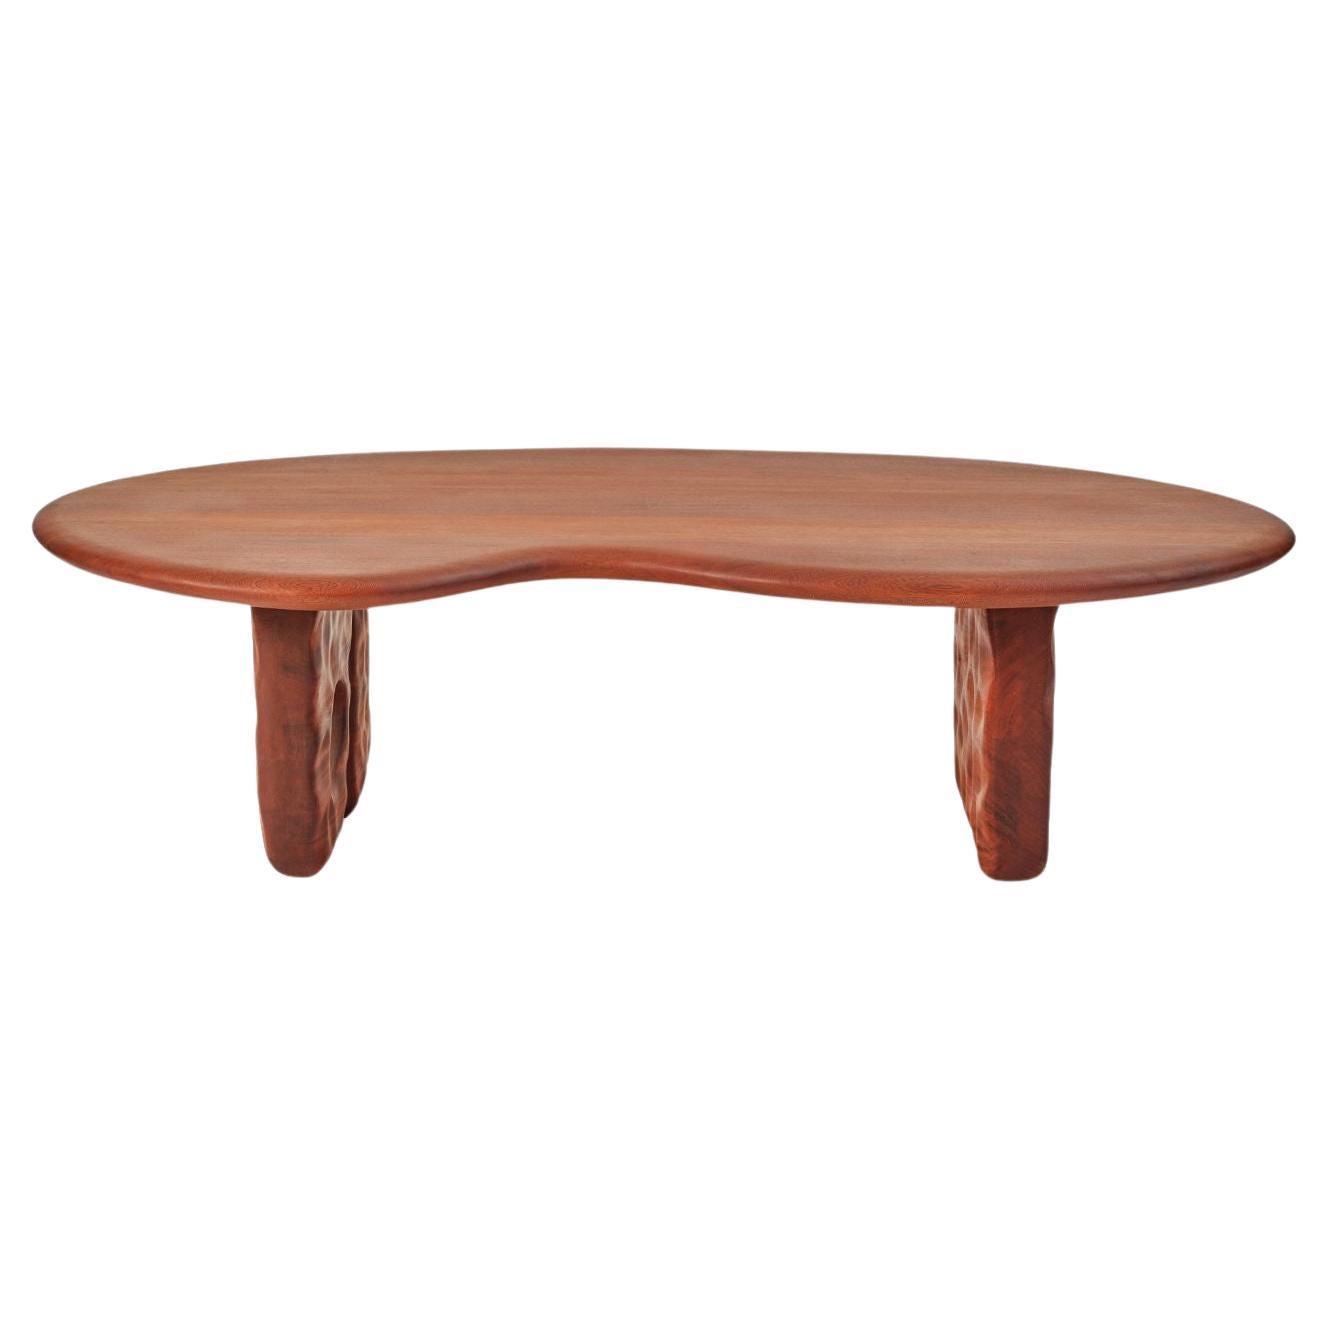 Avasin Low Table by Contemporary Ecowood im Angebot